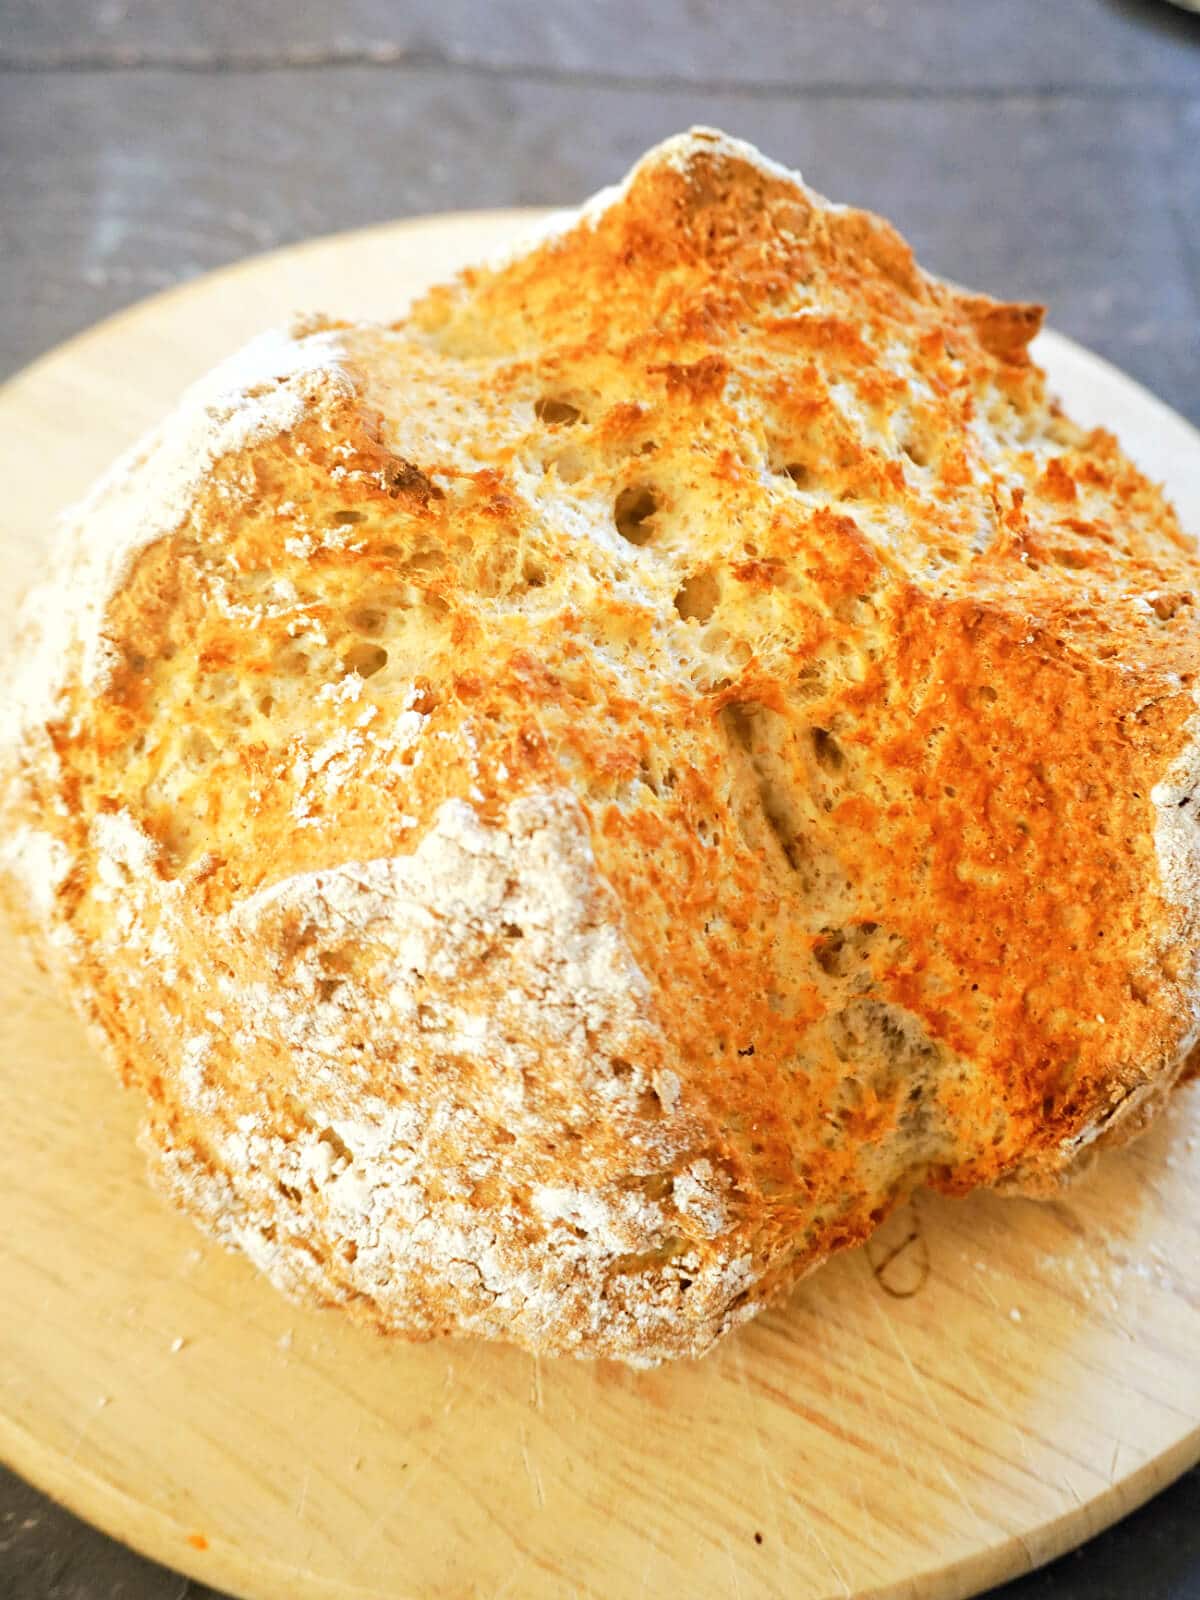 Close-up shot of a soda bread on a wooden board.